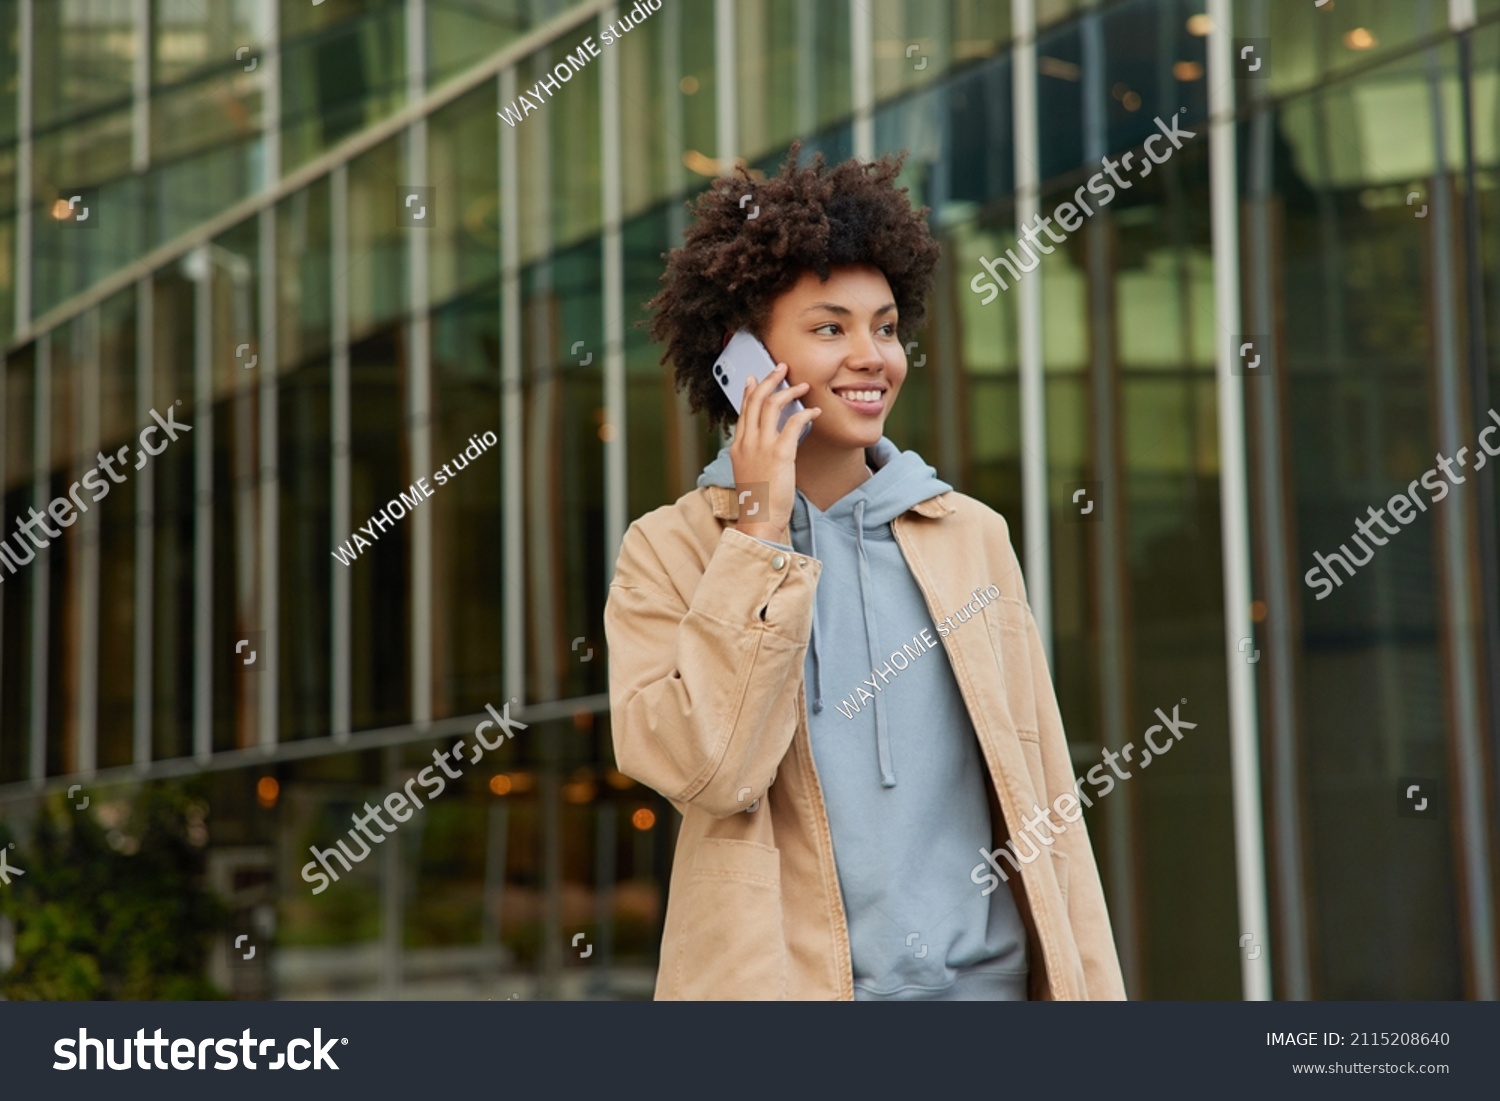 Horizontal shot of happy young woman makes telephone call in roaming wears casual sweatshirt and beige jacket had glad expression walks against blurred city building enjoys smartphone talking #2115208640